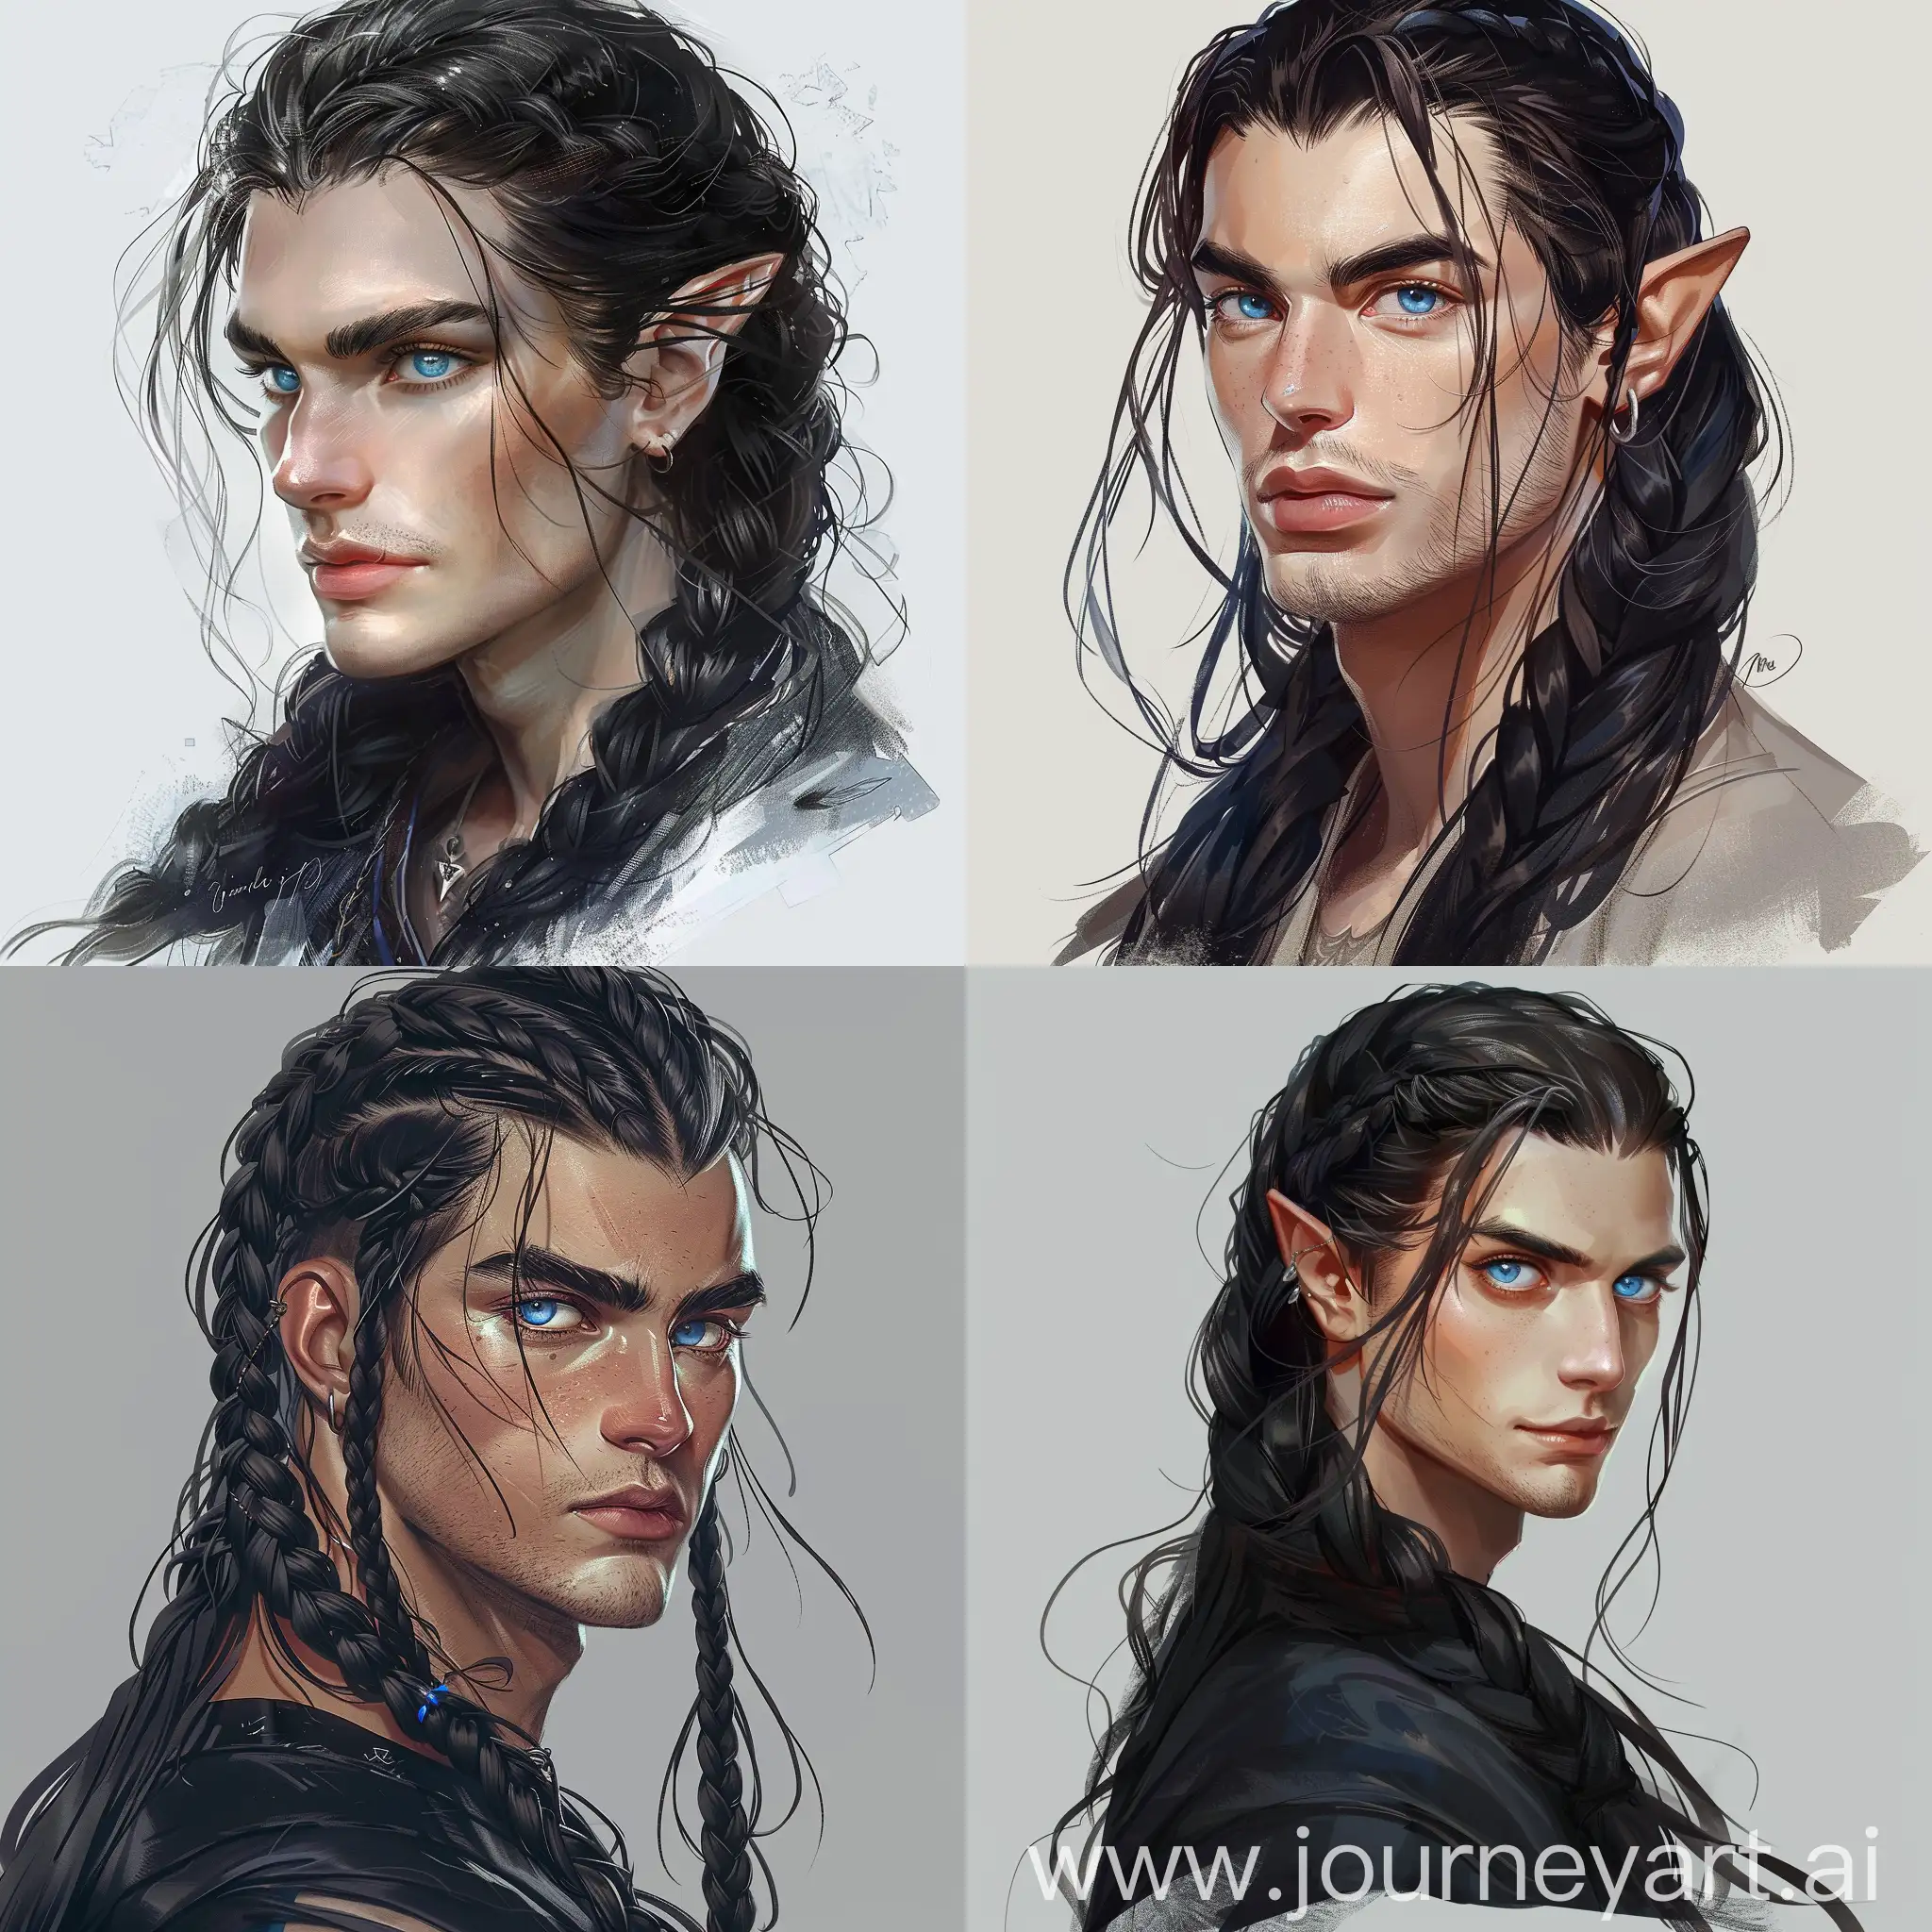 Handsome-Viking-Man-with-Piercing-Blue-Eyes-and-Braided-Hair-Portrait